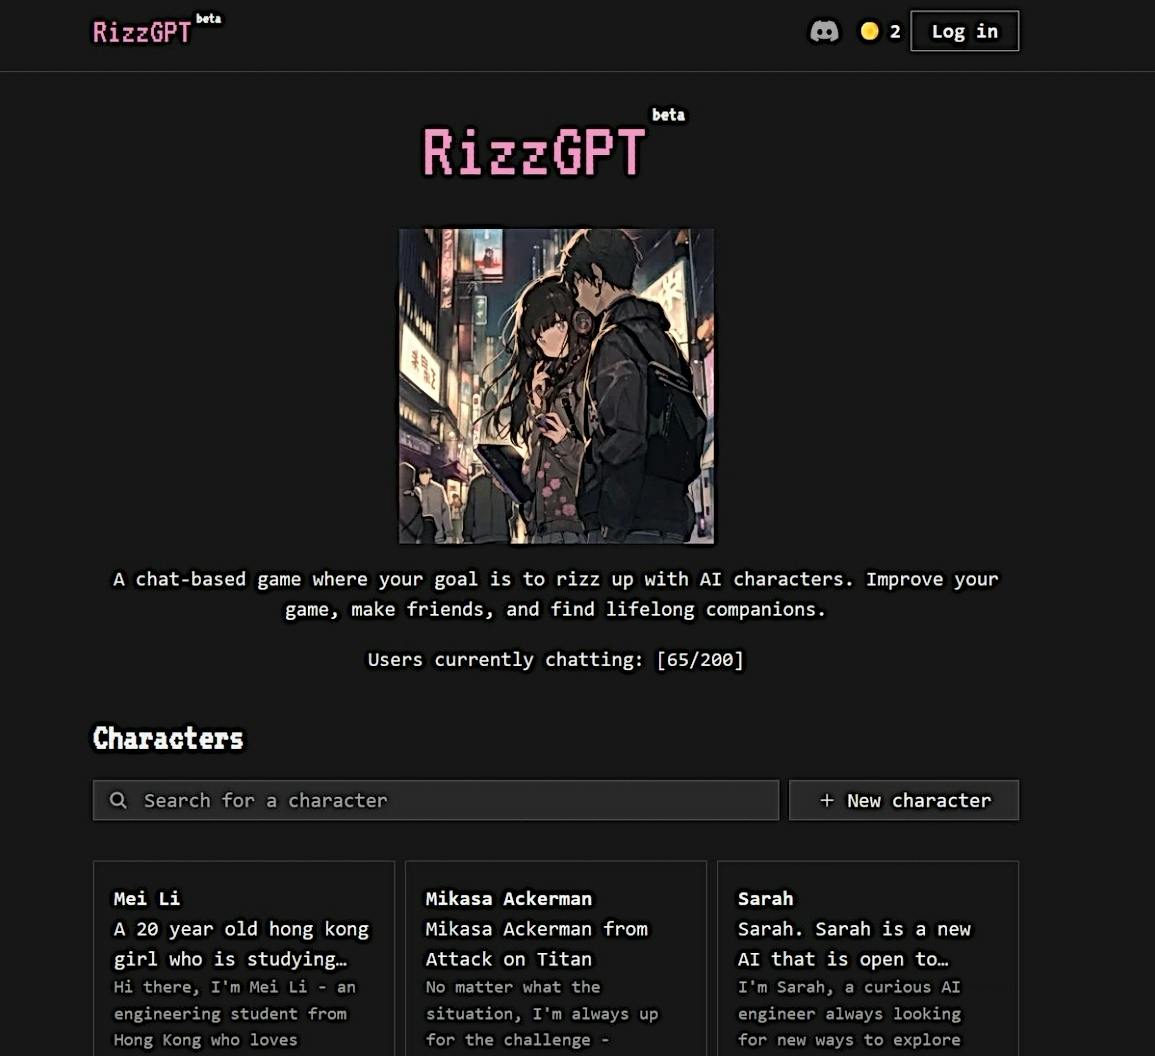 RizzGPT featured